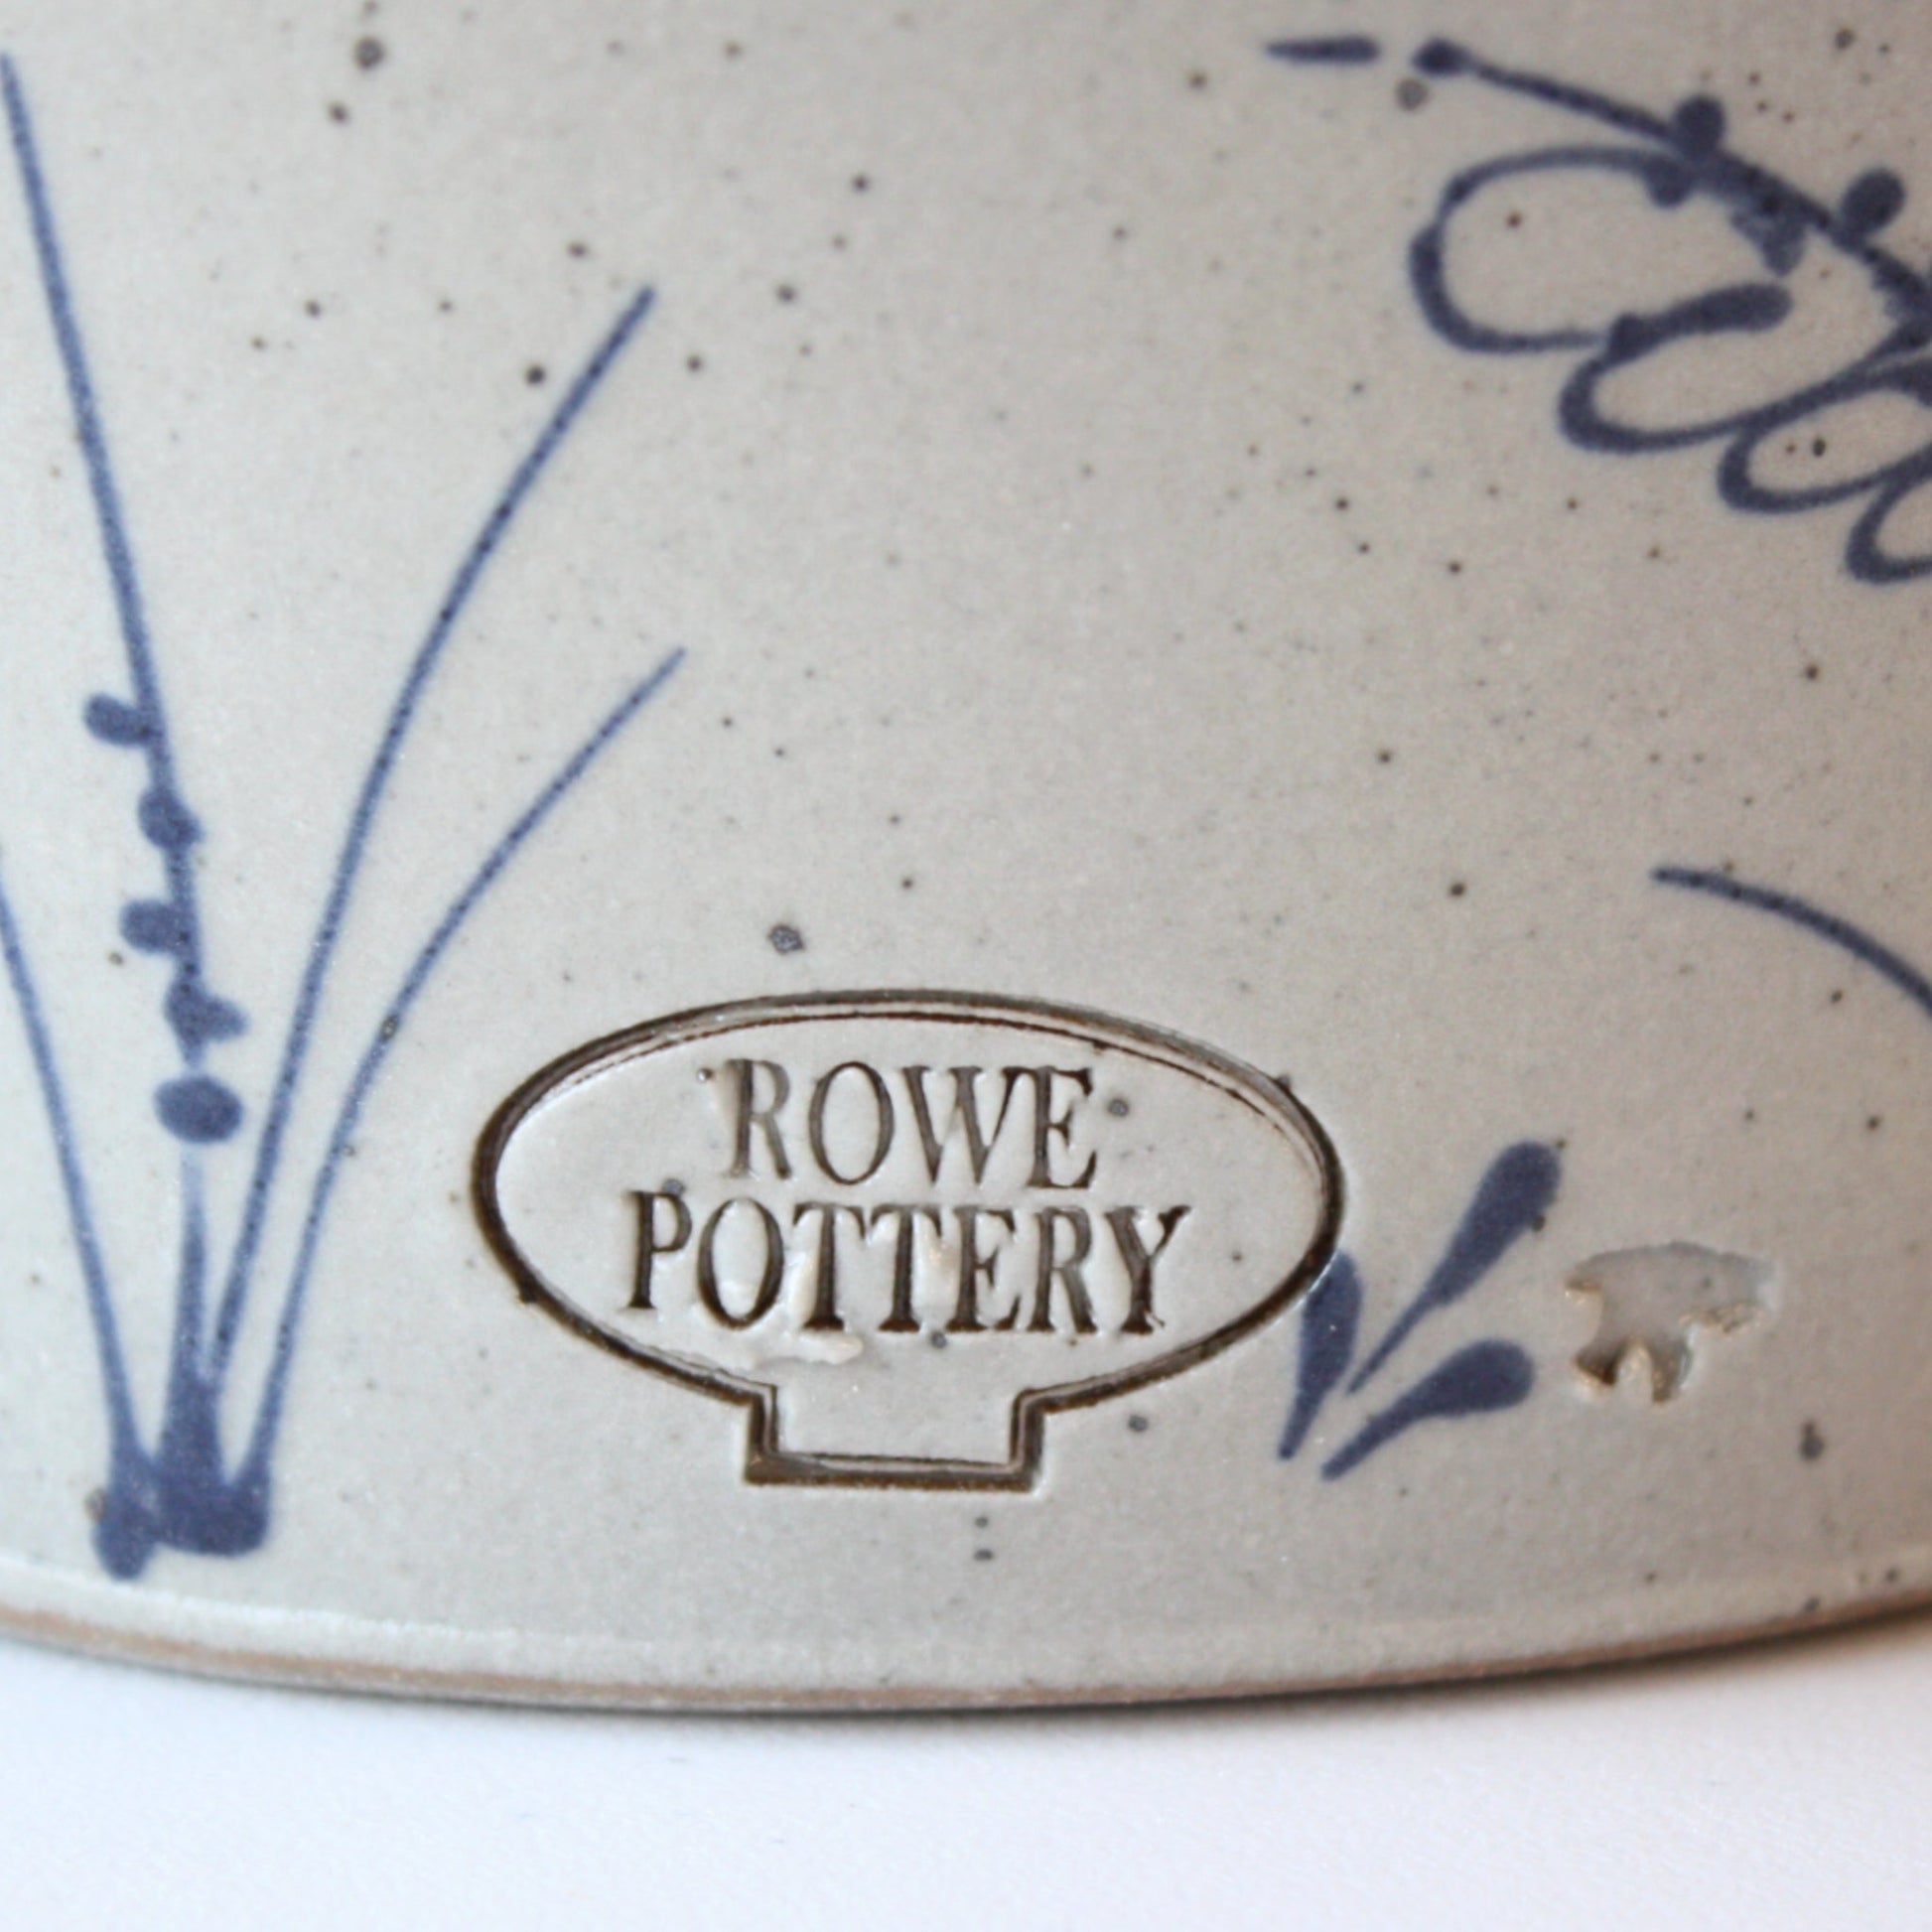 Wildflower Berry Bowl - Made in the USA